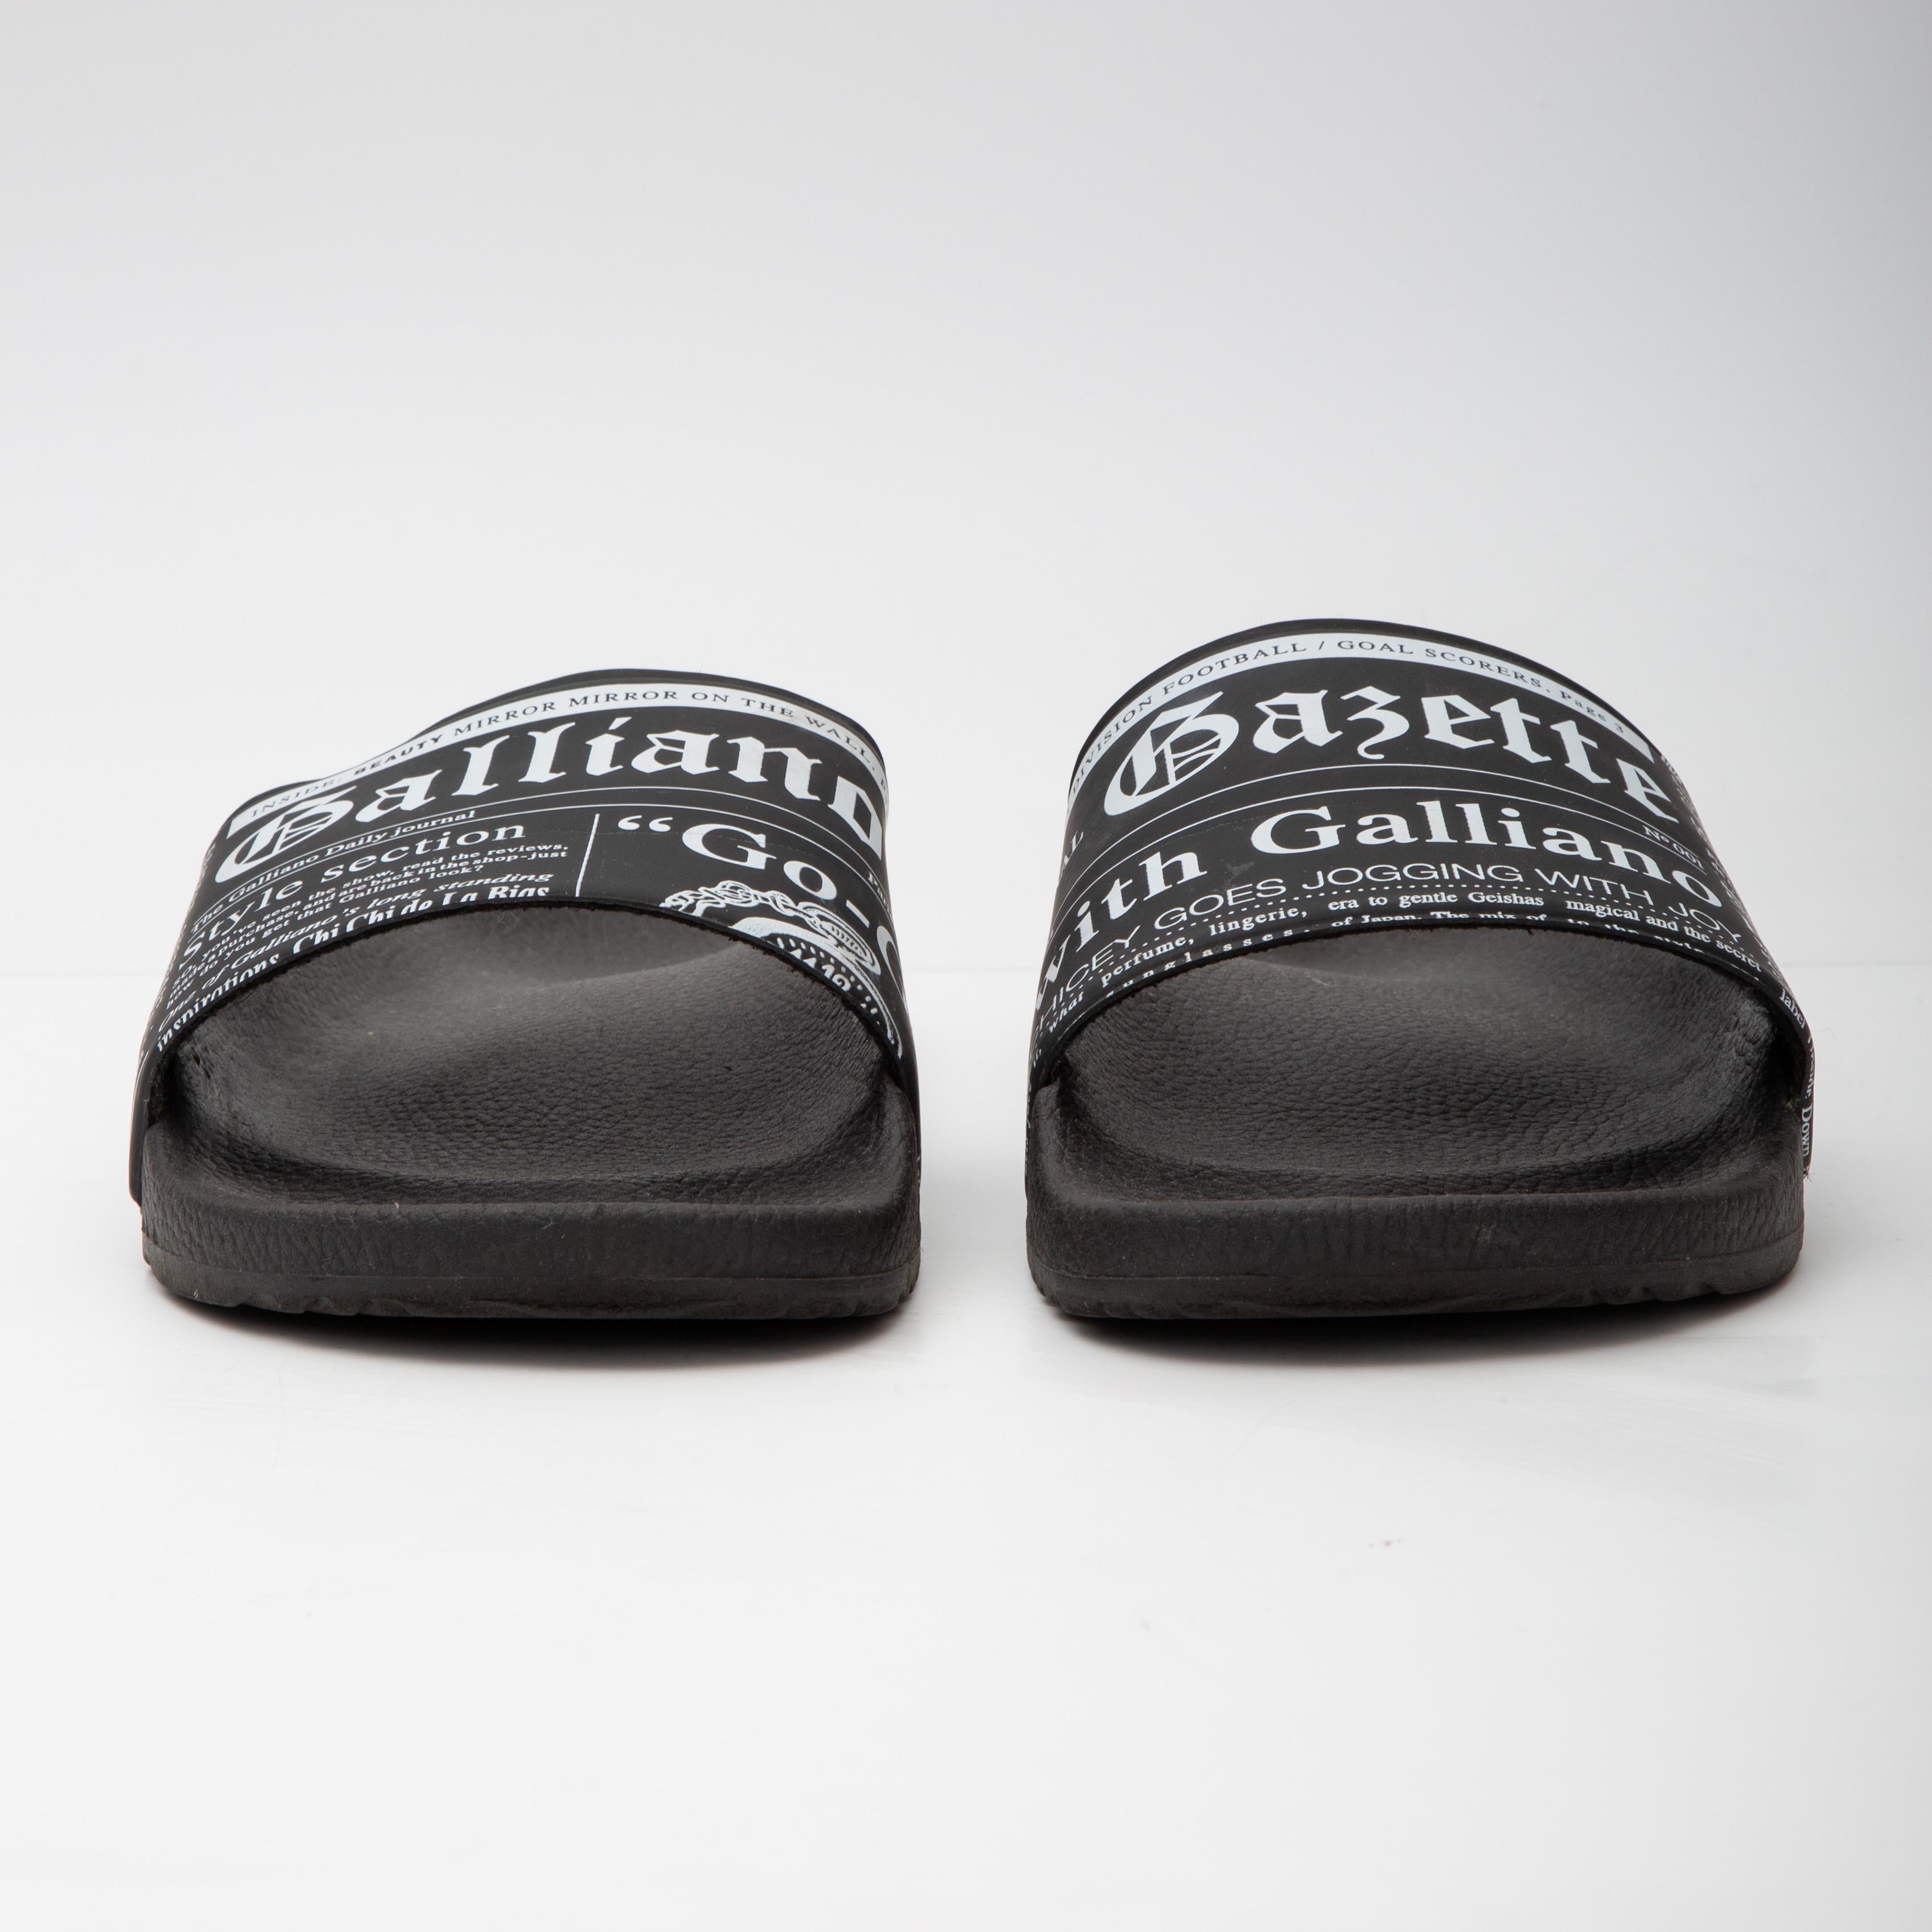 Men's or Women's. Gazette-Print Pool Slides. 

John Galliano Paris pool slides showcasing iconic gazette-print (newspaper print) motif. Featuring a flat heel, an open toe, a single-band vamp, a molded footbed, and an easy slide style.

COLOR: Black